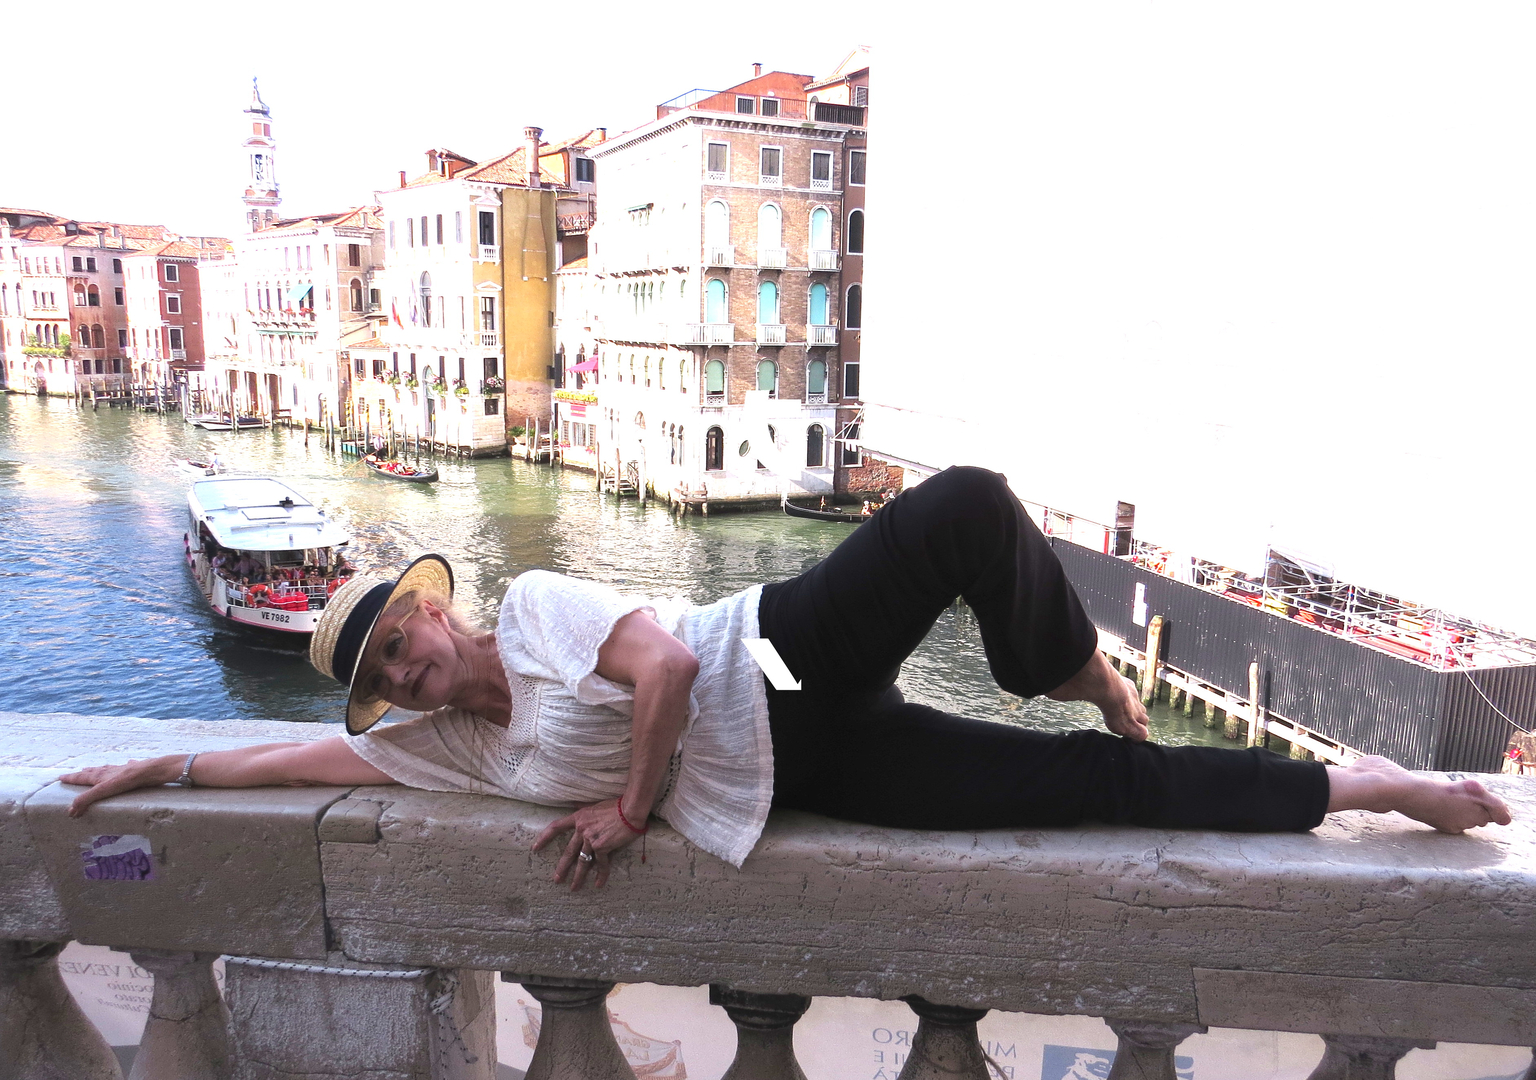 a person doing the floor-barre exercise near a canal